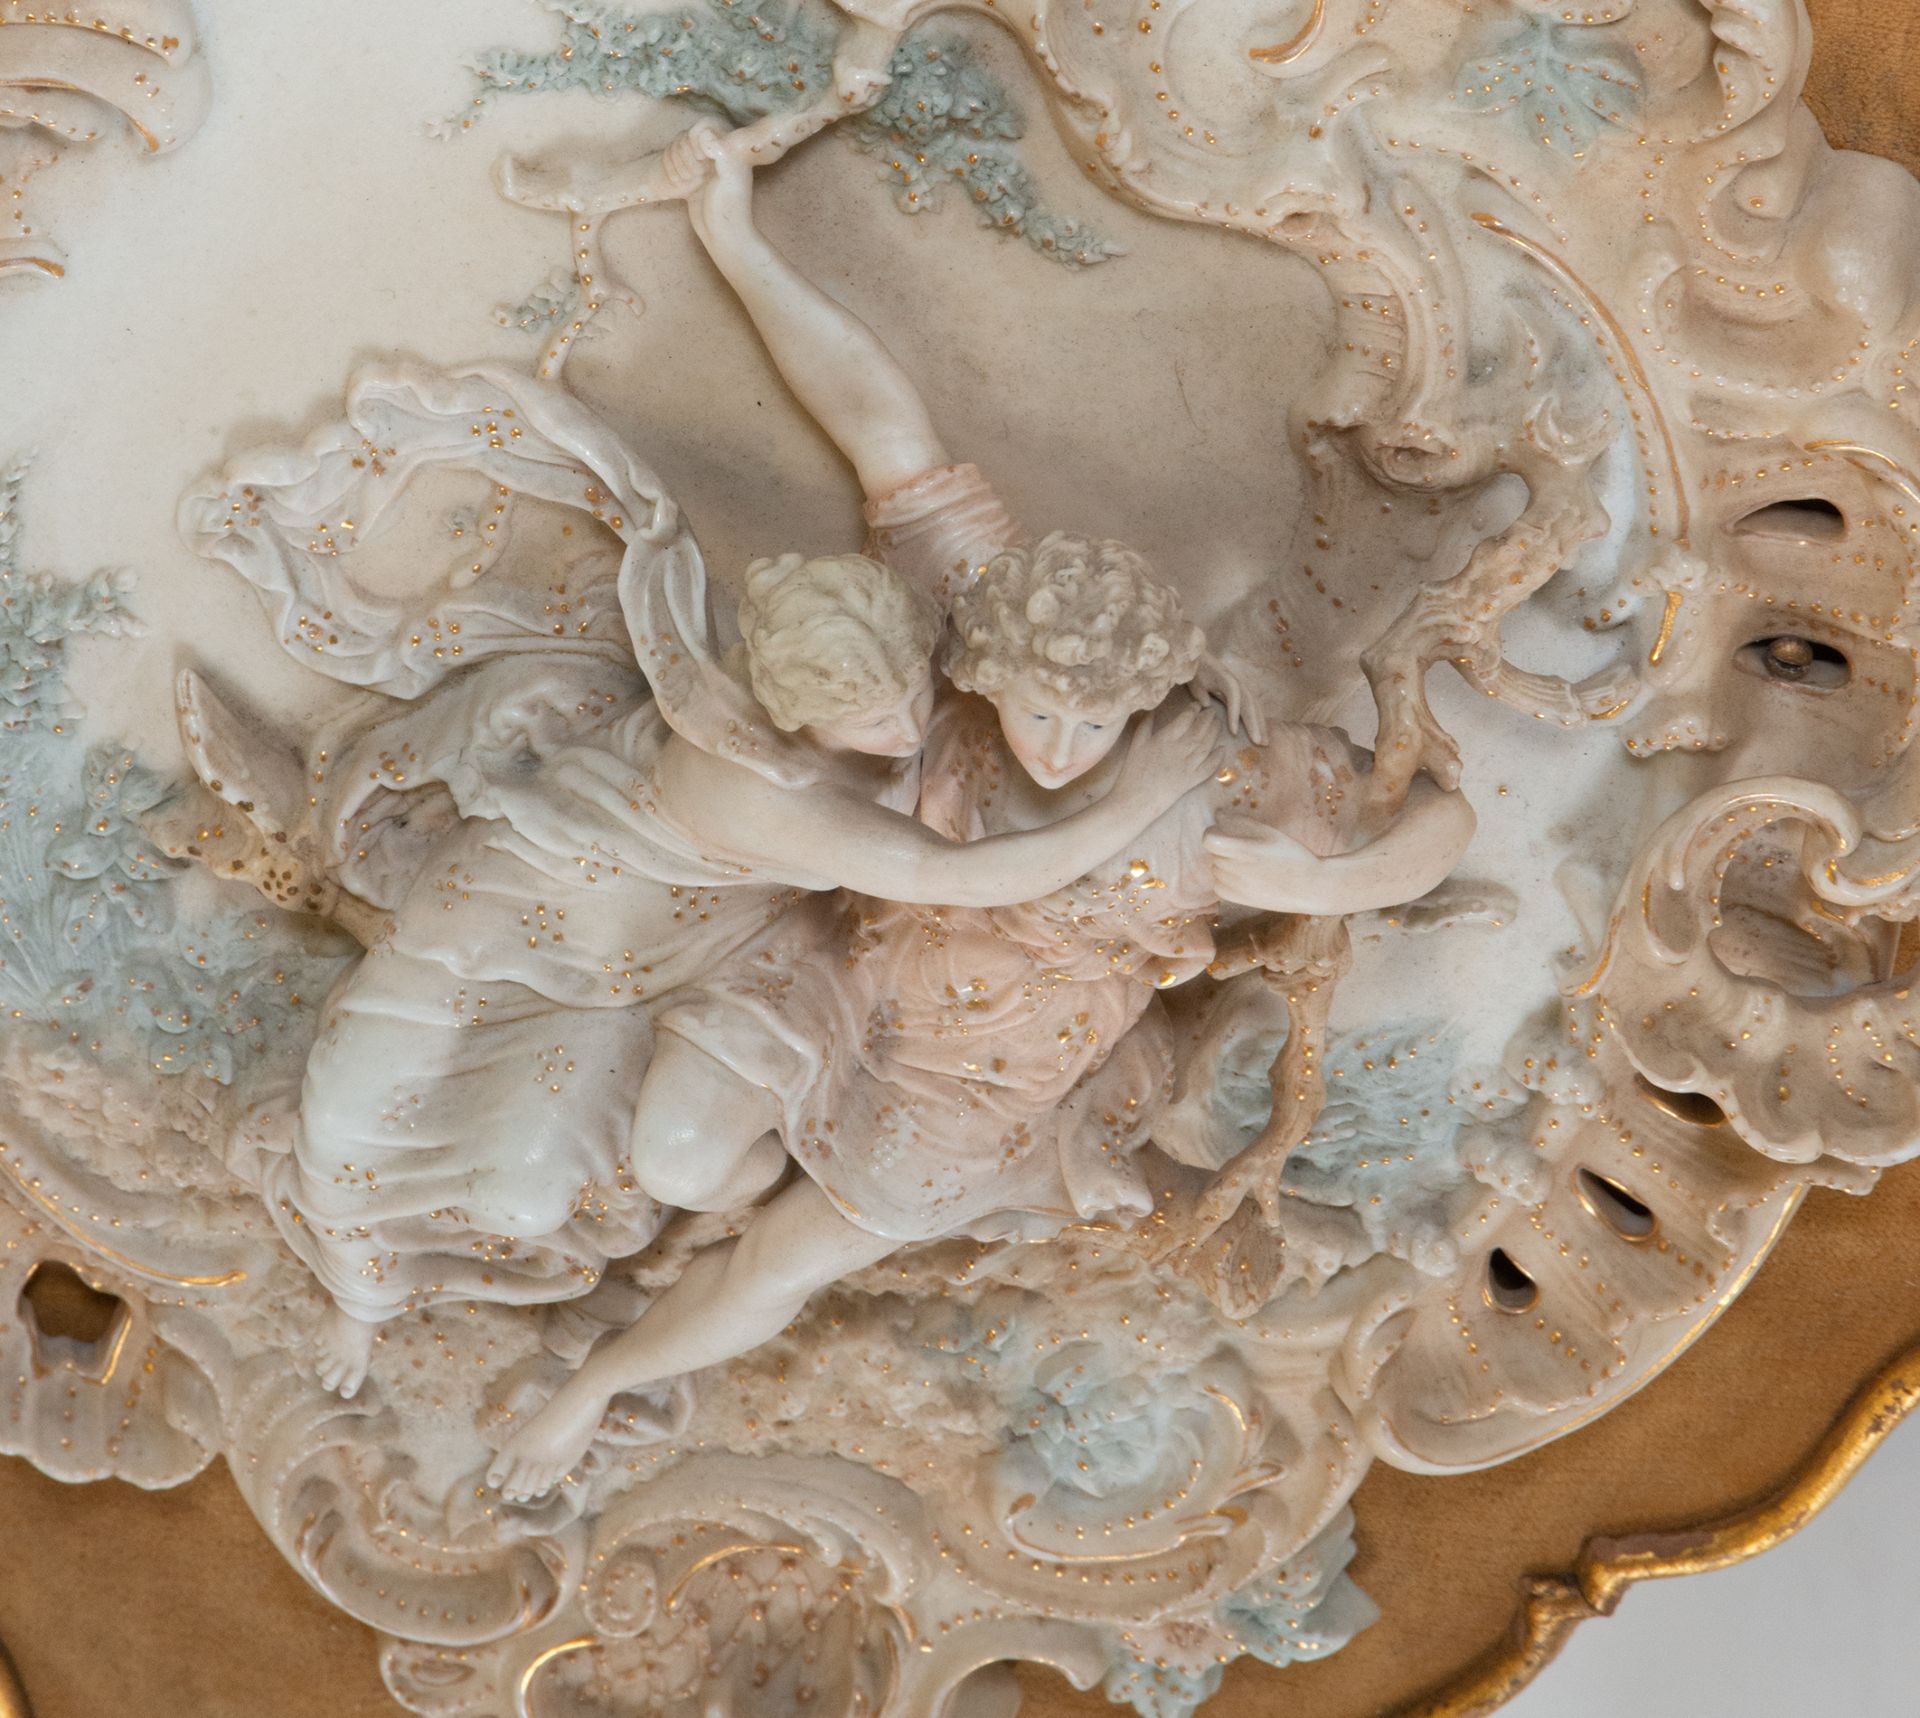 Art Nouveau ceiling light in biscuit porcelain, 20th century - Image 4 of 6